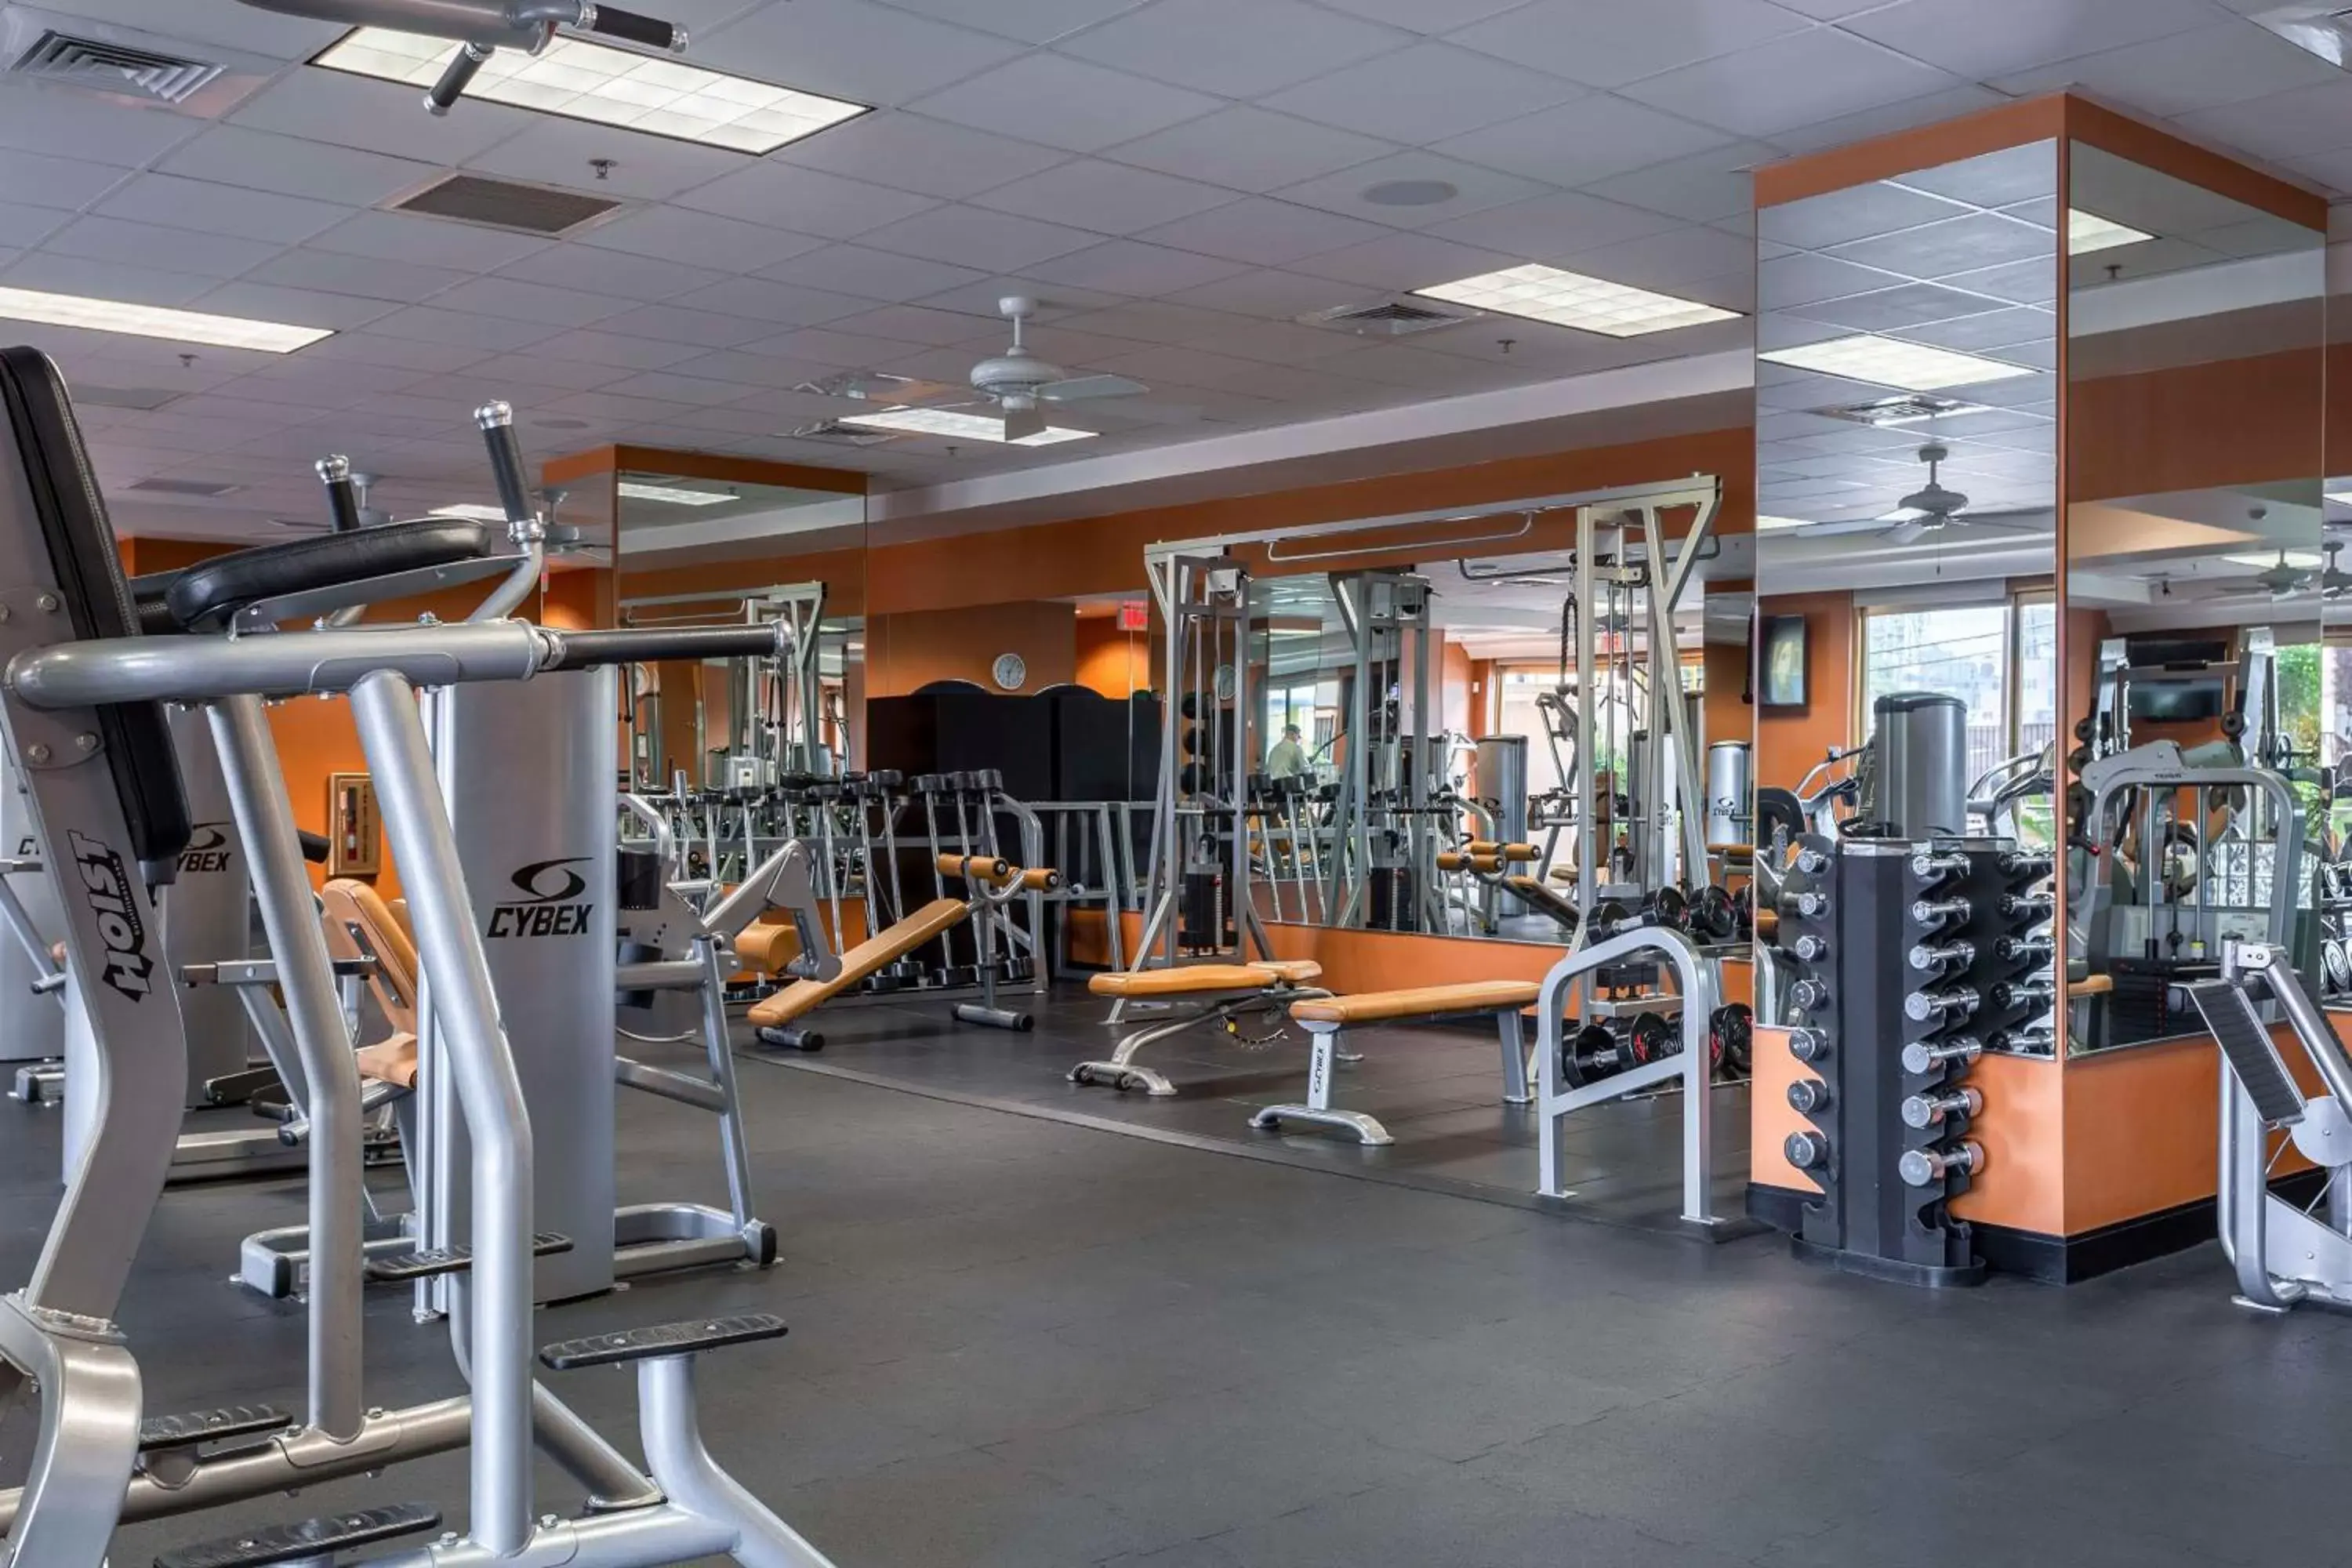 Fitness centre/facilities, Fitness Center/Facilities in Hilton Vacation Club Polo Towers Las Vegas